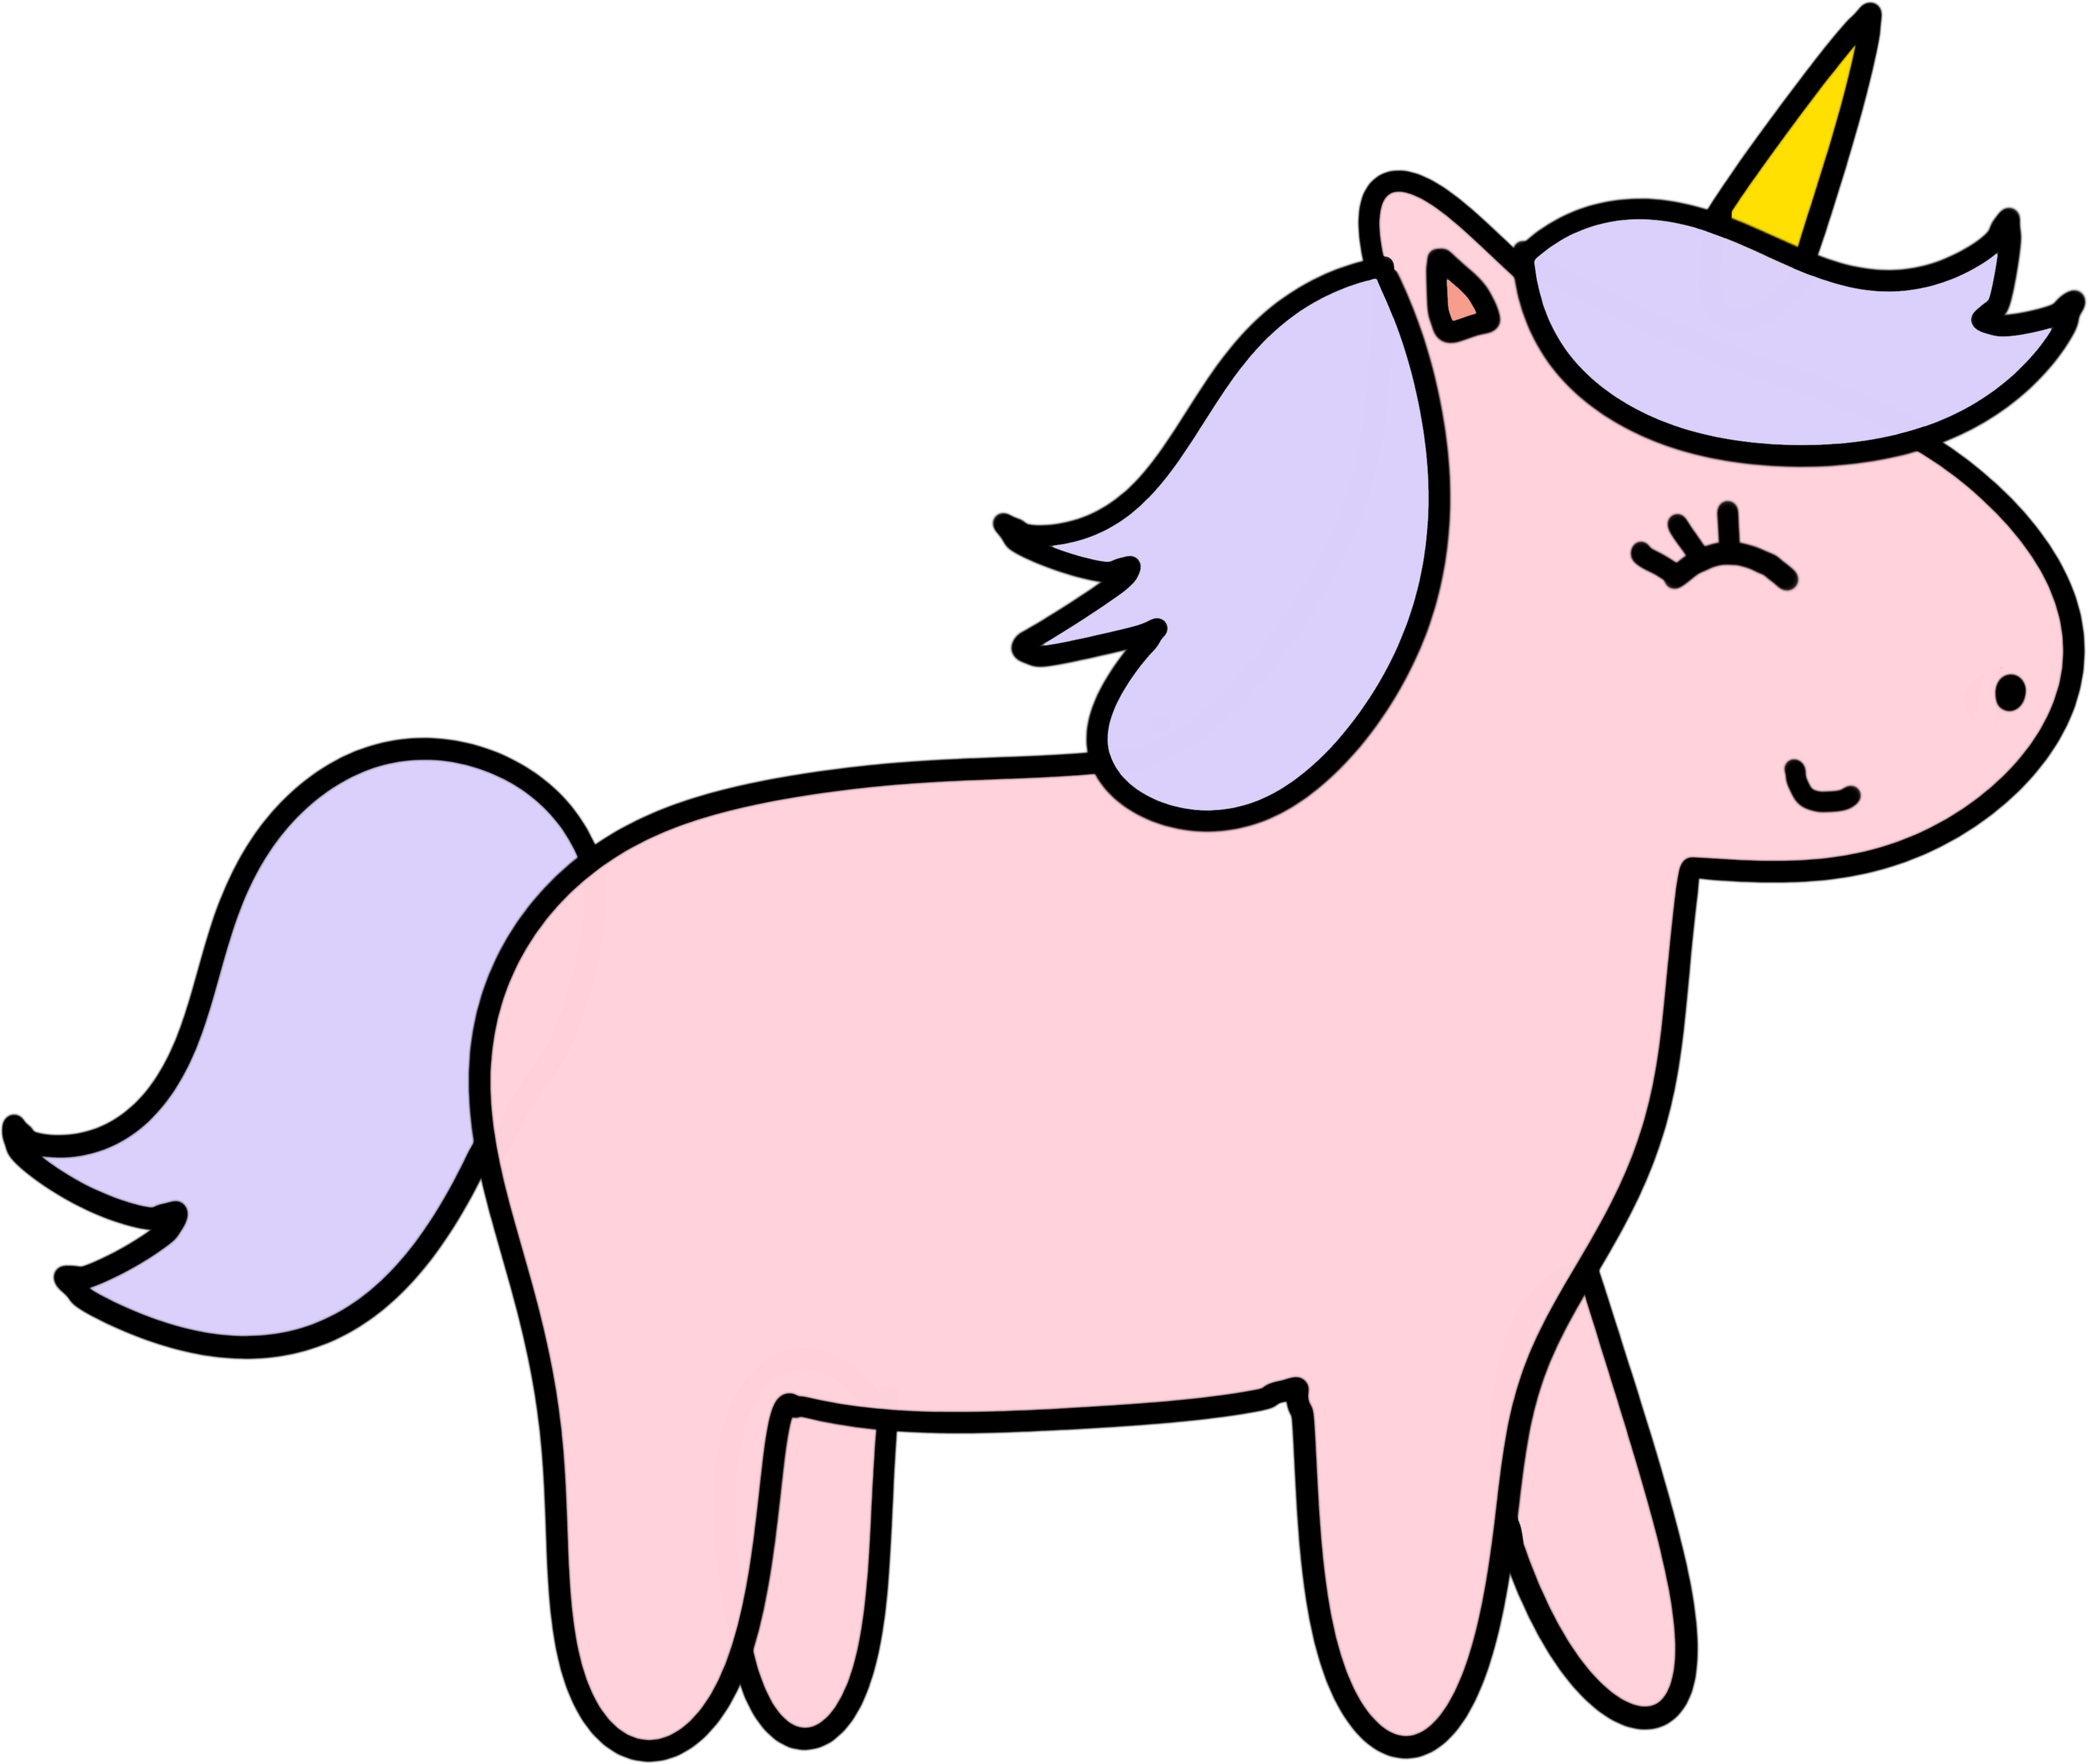 Cute Unicorn Drawings | Free Download | Party with Unicorns